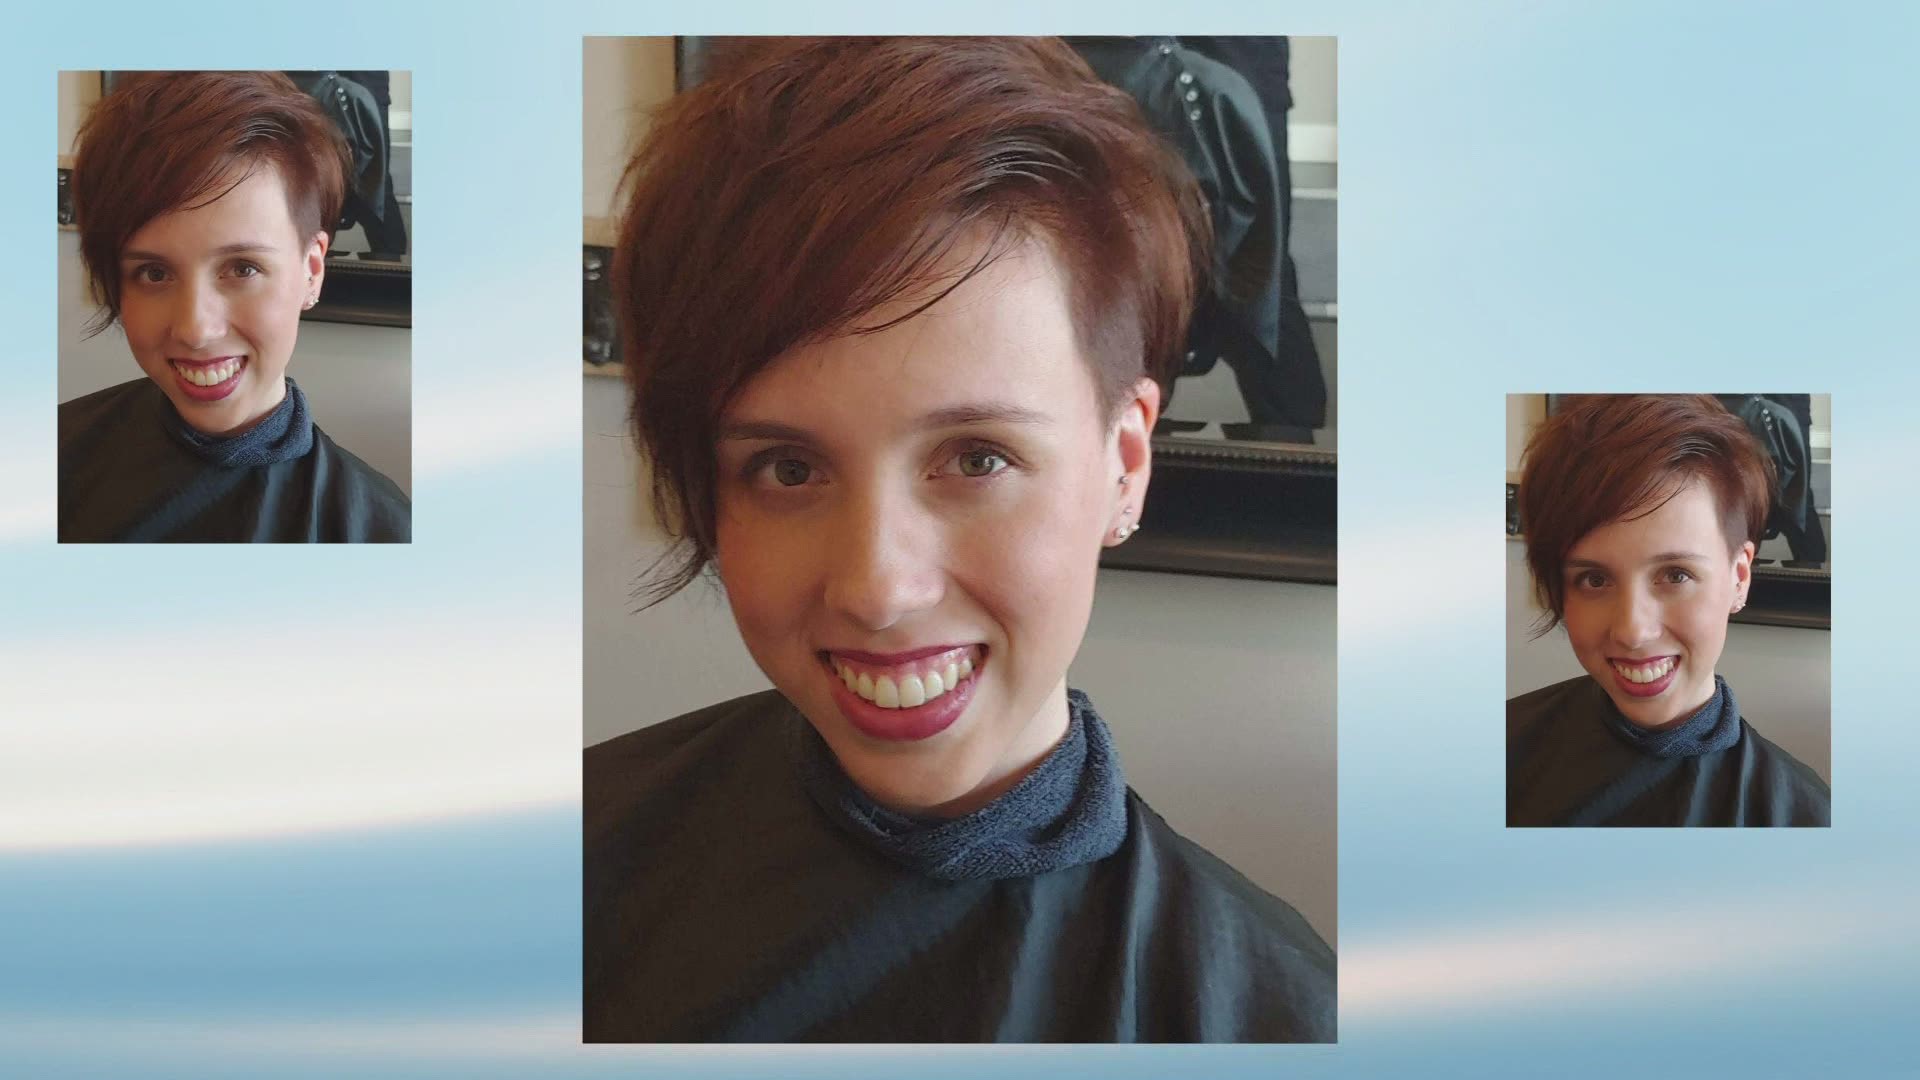 See a local woman's new look as she trades in her long locks for a shorter style.